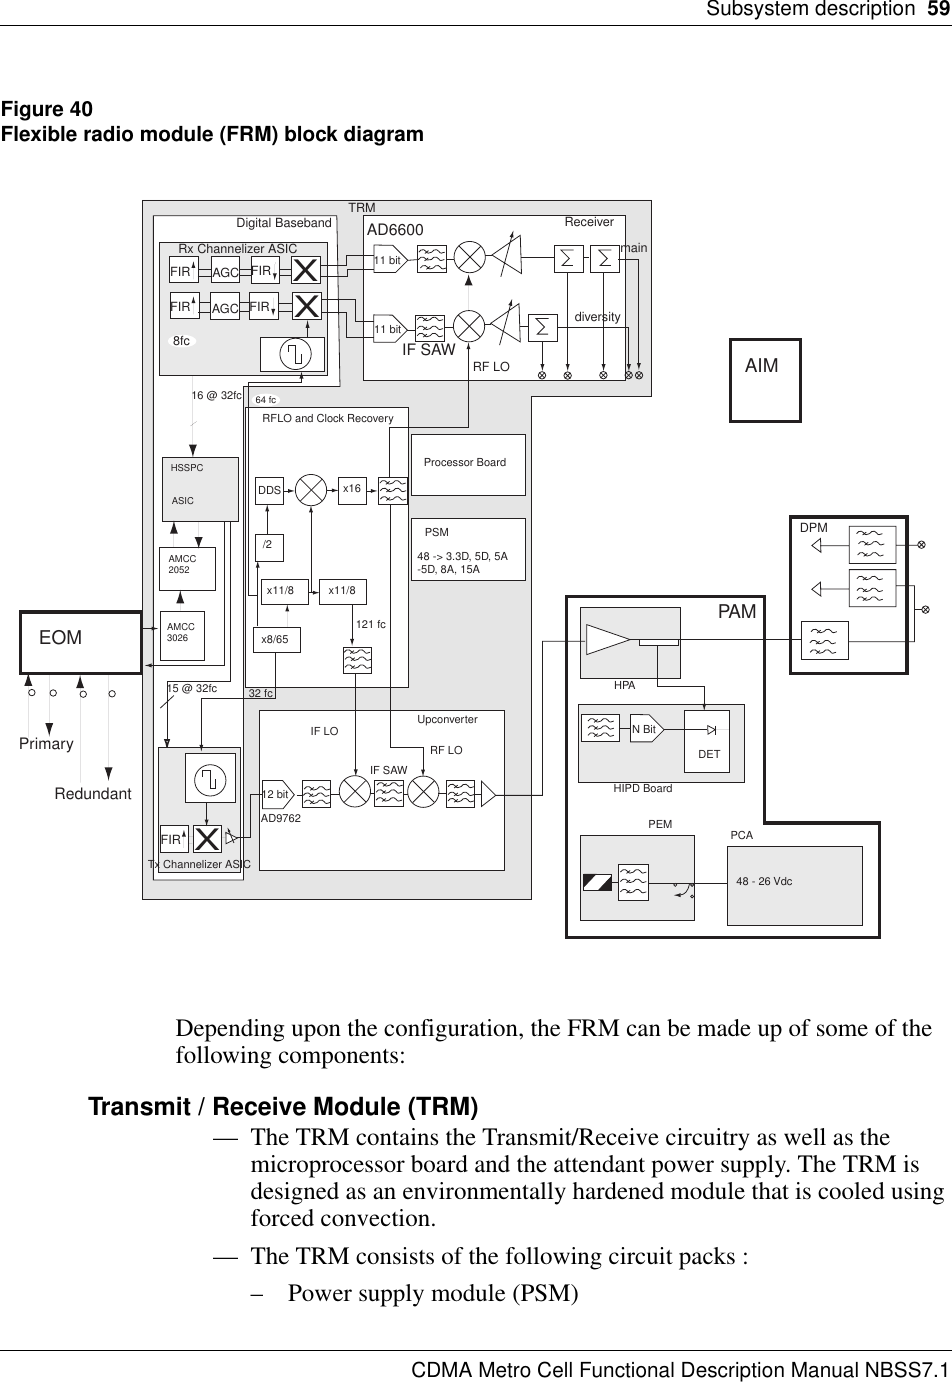 Subsystem description  59CDMA Metro Cell Functional Description Manual NBSS7.1Figure 40Flexible radio module (FRM) block diagramDepending upon the configuration, the FRM can be made up of some of the following components:Transmit / Receive Module (TRM)— The TRM contains the Transmit/Receive circuitry as well as the microprocessor board and the attendant power supply. The TRM is designed as an environmentally hardened module that is cooled using forced convection. — The TRM consists of the following circuit packs :– Power supply module (PSM)DETHPAHIPD BoardPEM PCAN Bit48 - 26 VdcAIMAD6600IF SAW11 bit11 bitProcessor BoardPSM48 -&gt; 3.3D, 5D, 5A-5D, 8A, 15Ax8/65/2DDS x16x11/8 x11/8IF LO UpconverterRF LOIF SAW12 bitAD9762EOMPrimaryRedundantFIRFIRFIR FIRFIRXXX15 @ 32fc16 @ 32fc32 fcRFLO and Clock Recovery64 fcHSSPCASICAMCC2052AMCC3026AGCAGC8fcRx Channelizer ASICDigital Baseband TRM ReceivermaindiversityRF LODPMPAMTx Channelizer ASIC121 fc